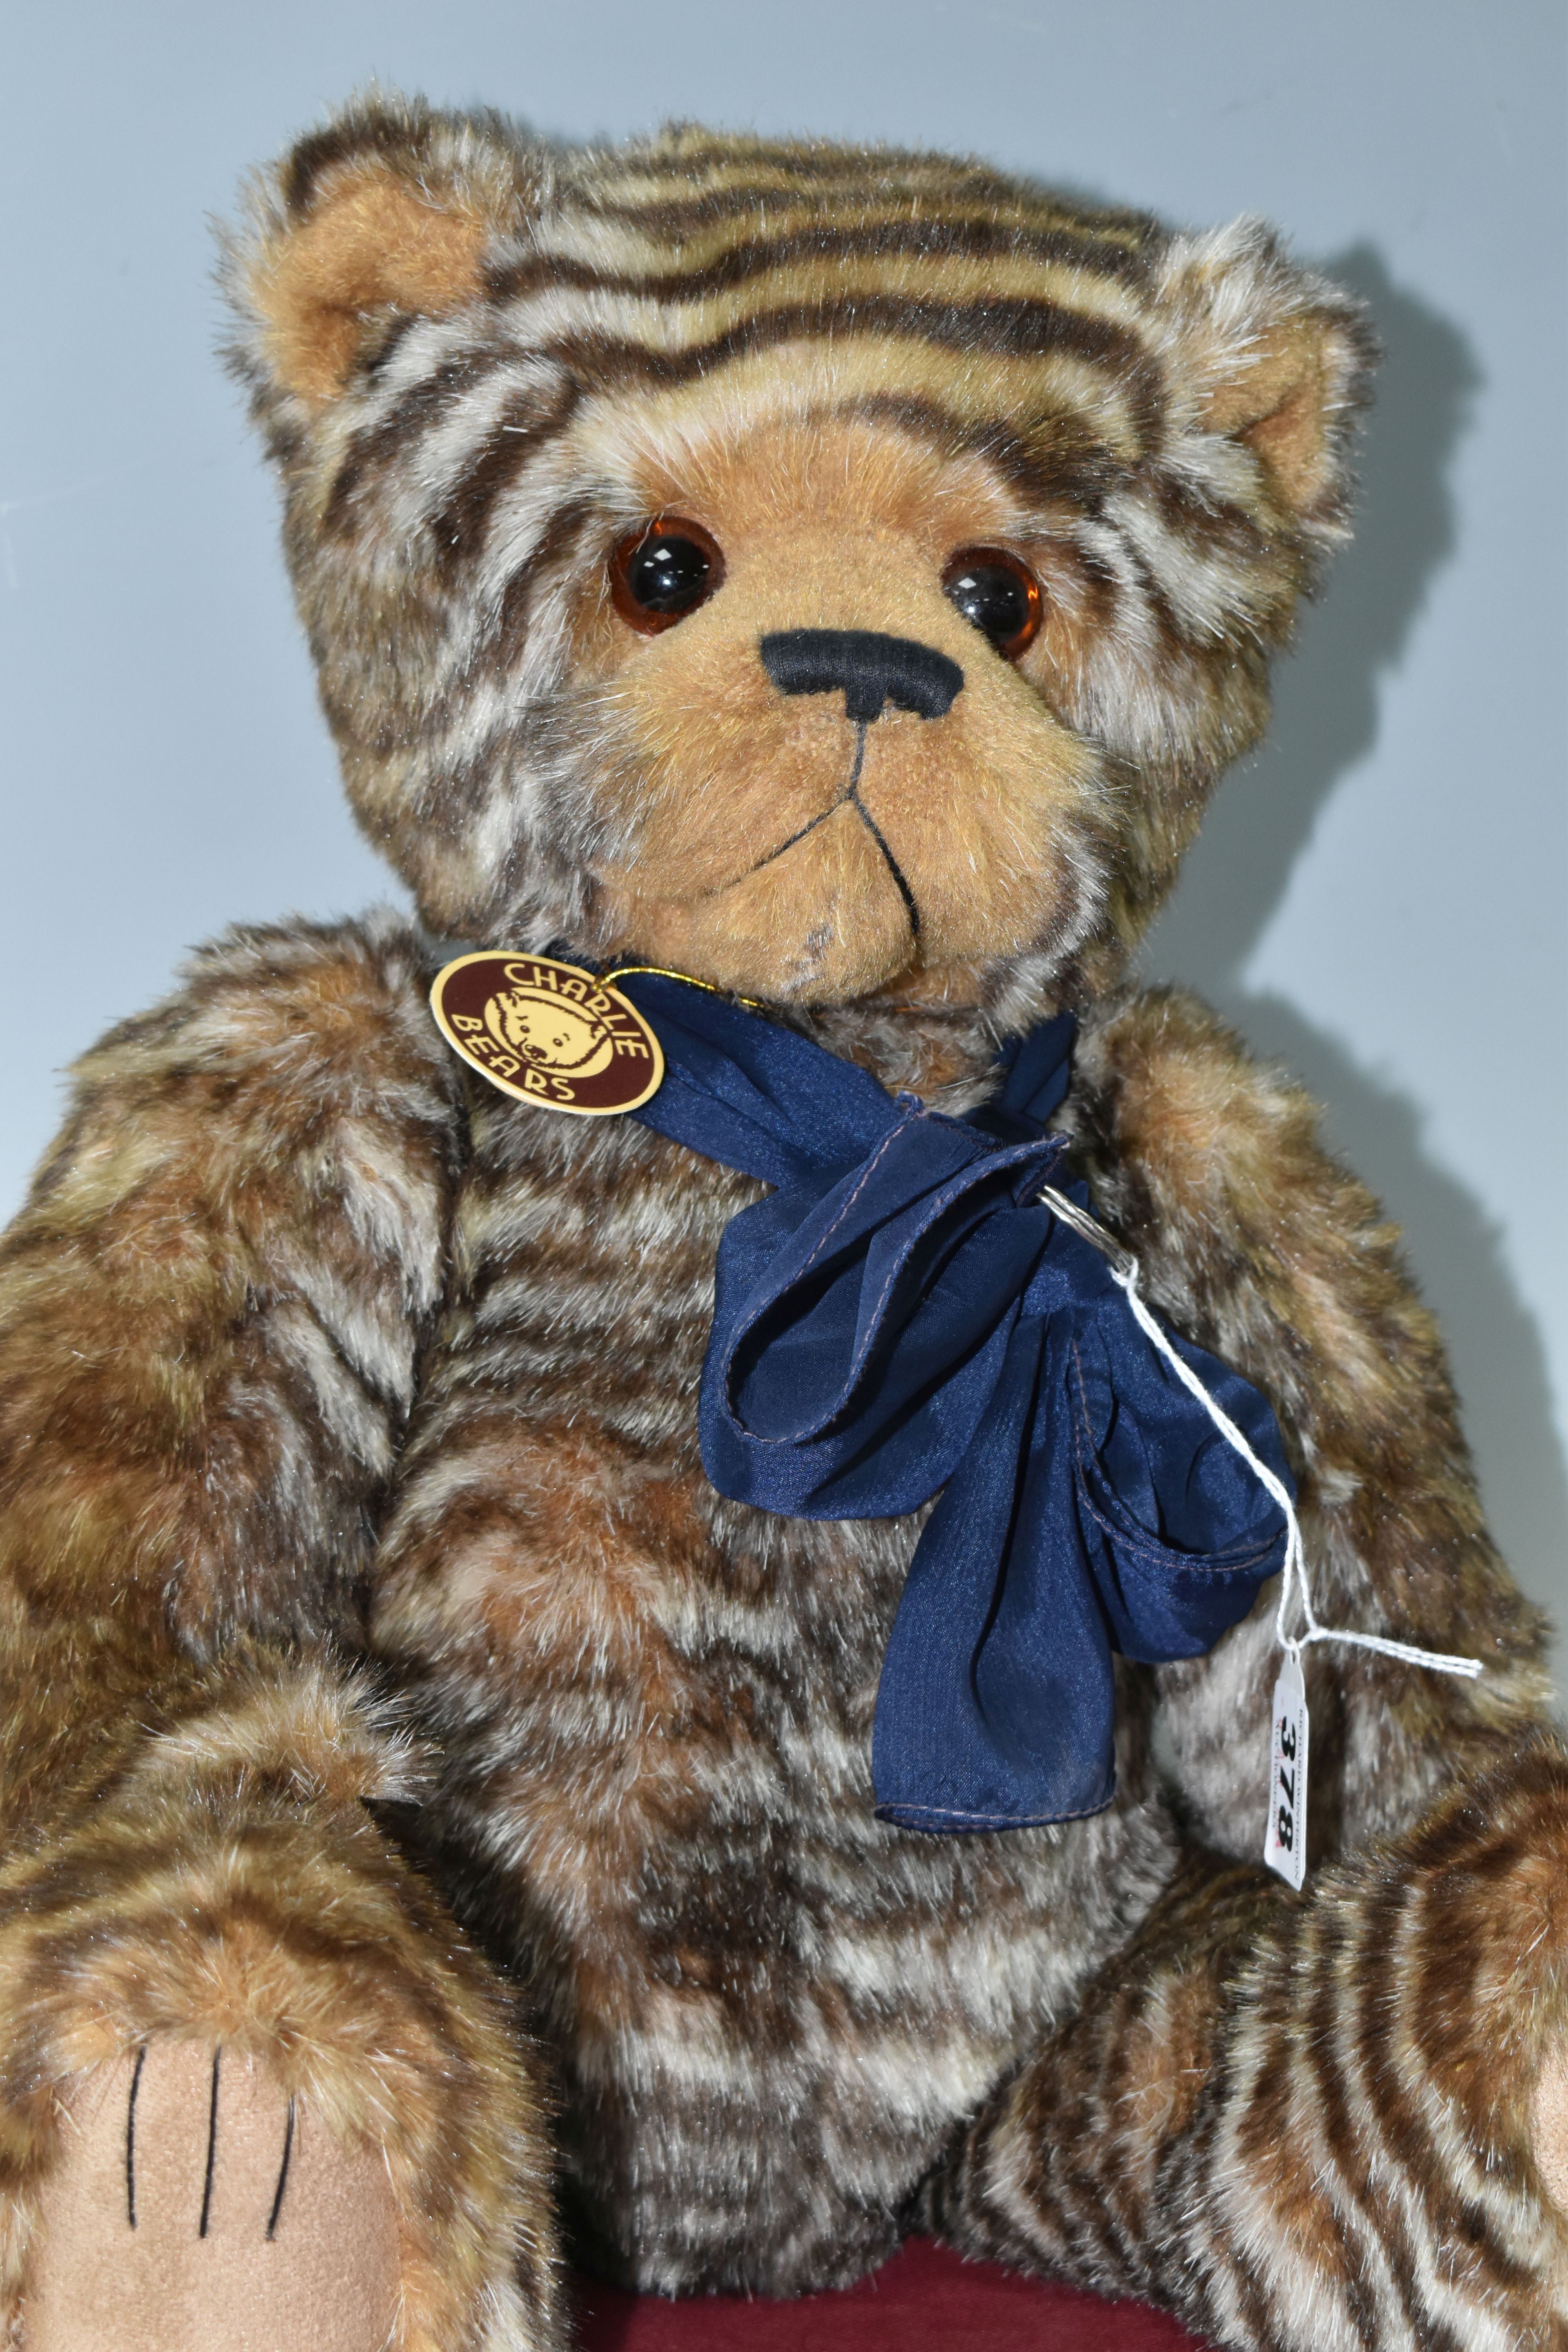 A CHARLIE BEARS 'OTTO' TEDDY BEAR, no CB131299, designed by Heather Lyell, height approximately - Image 2 of 3